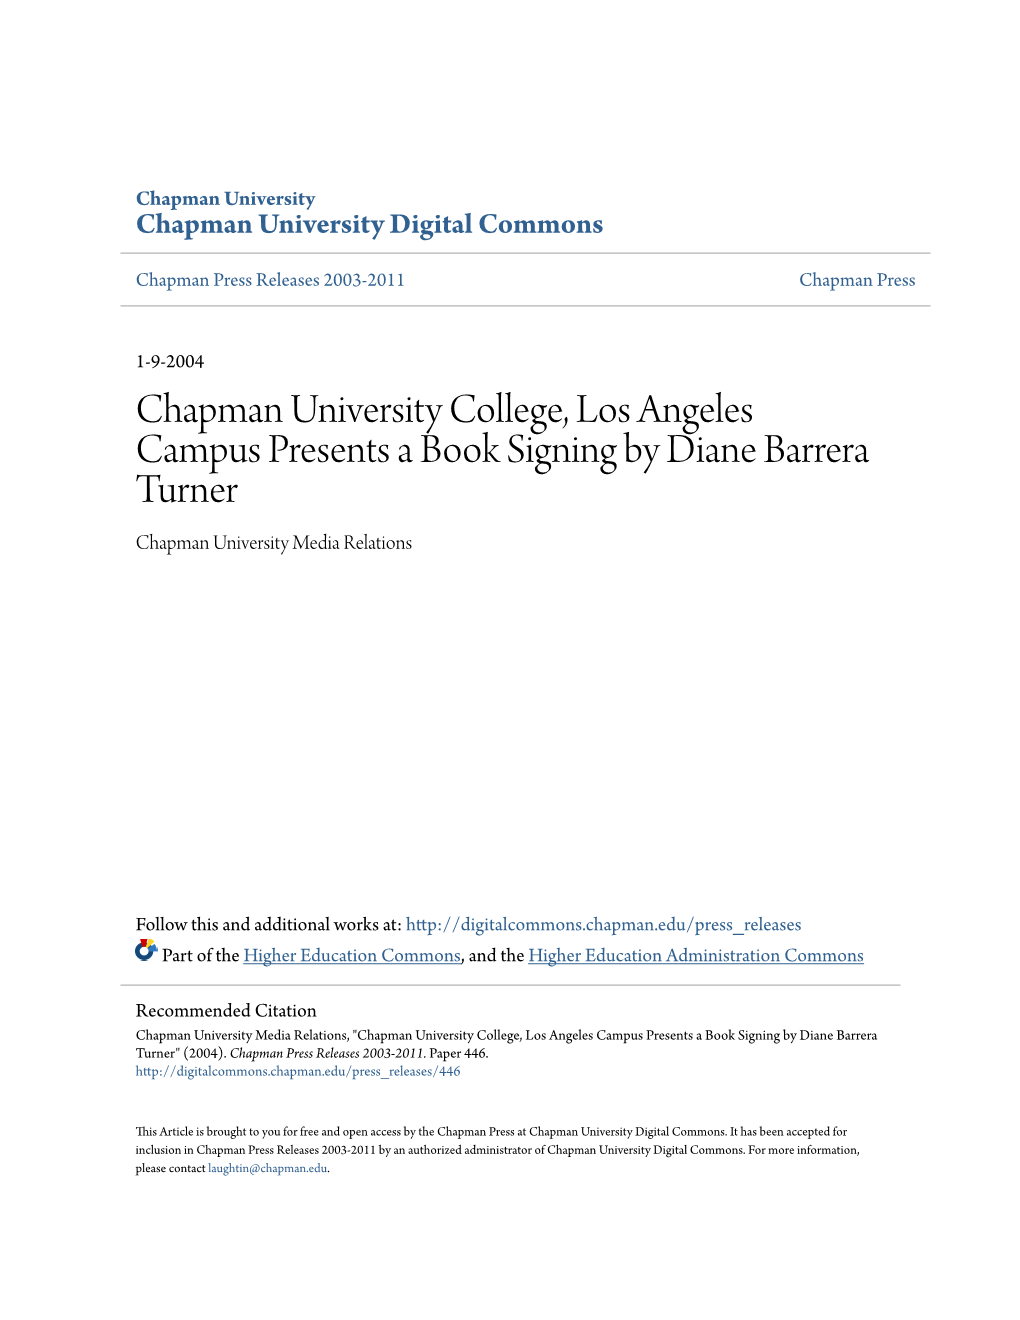 Chapman University College, Los Angeles Campus Presents a Book Signing by Diane Barrera Turner Chapman University Media Relations